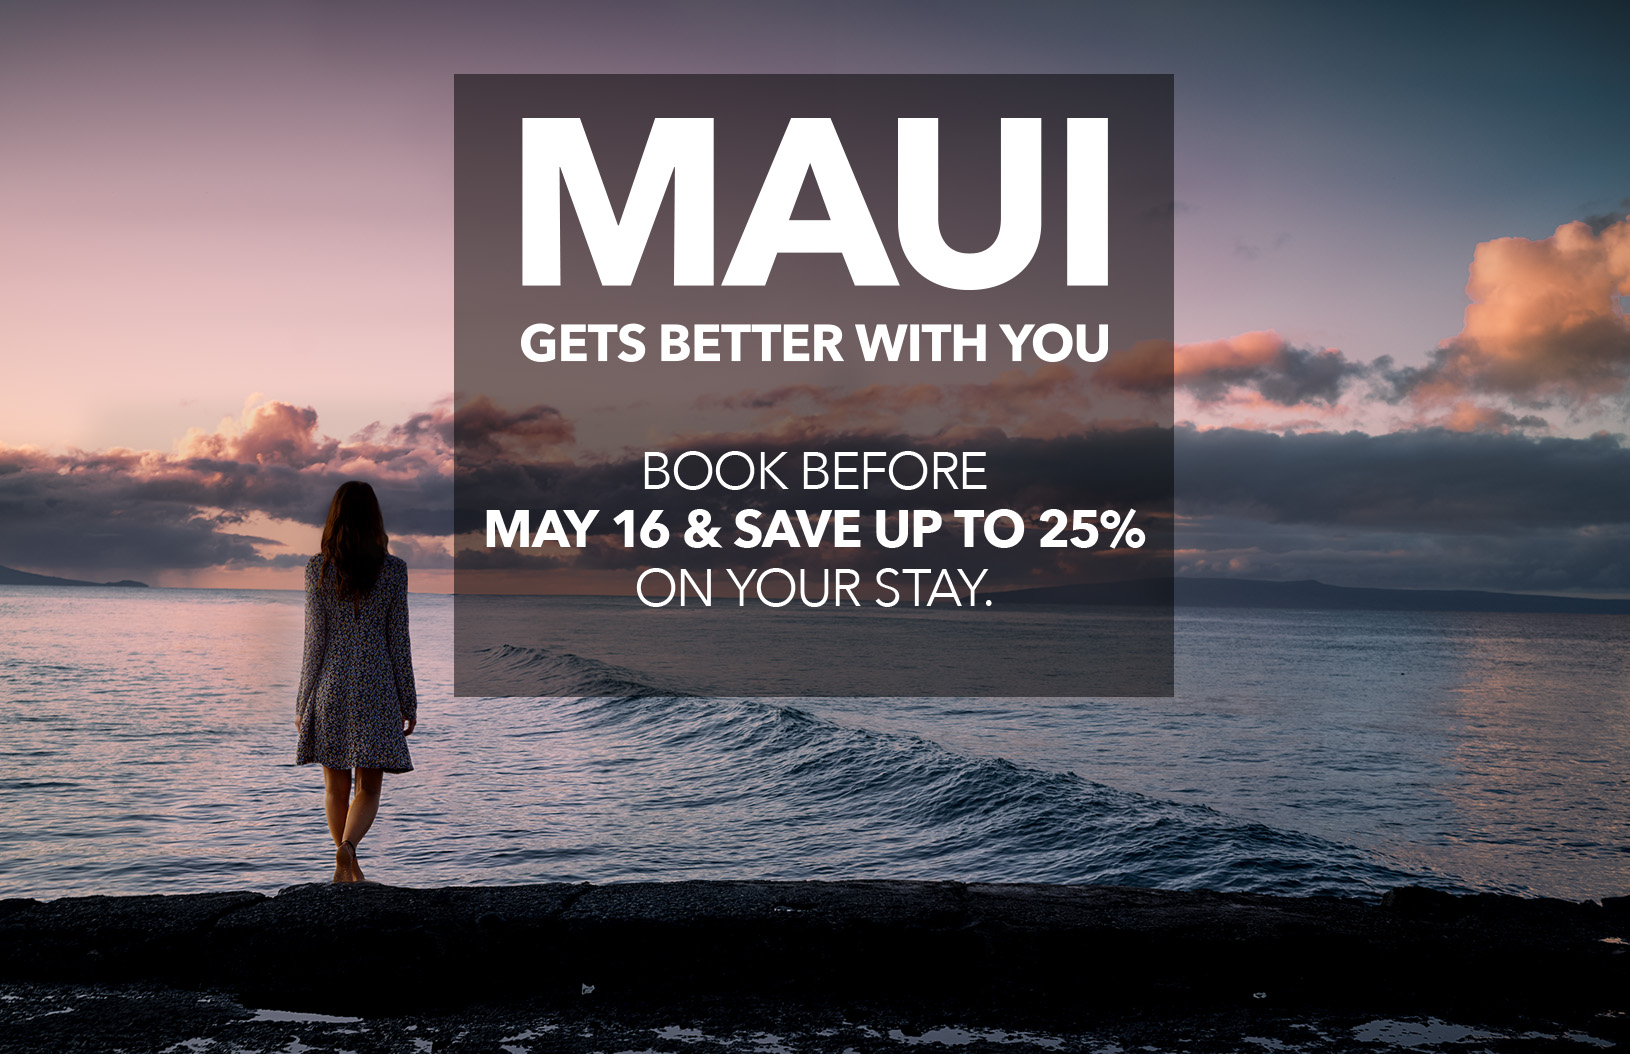 MAUI GETS BETTER WITH YOU - BOOK BEFORE MAY 16 & SAVE UP TO 25% ON YOUR STAY.